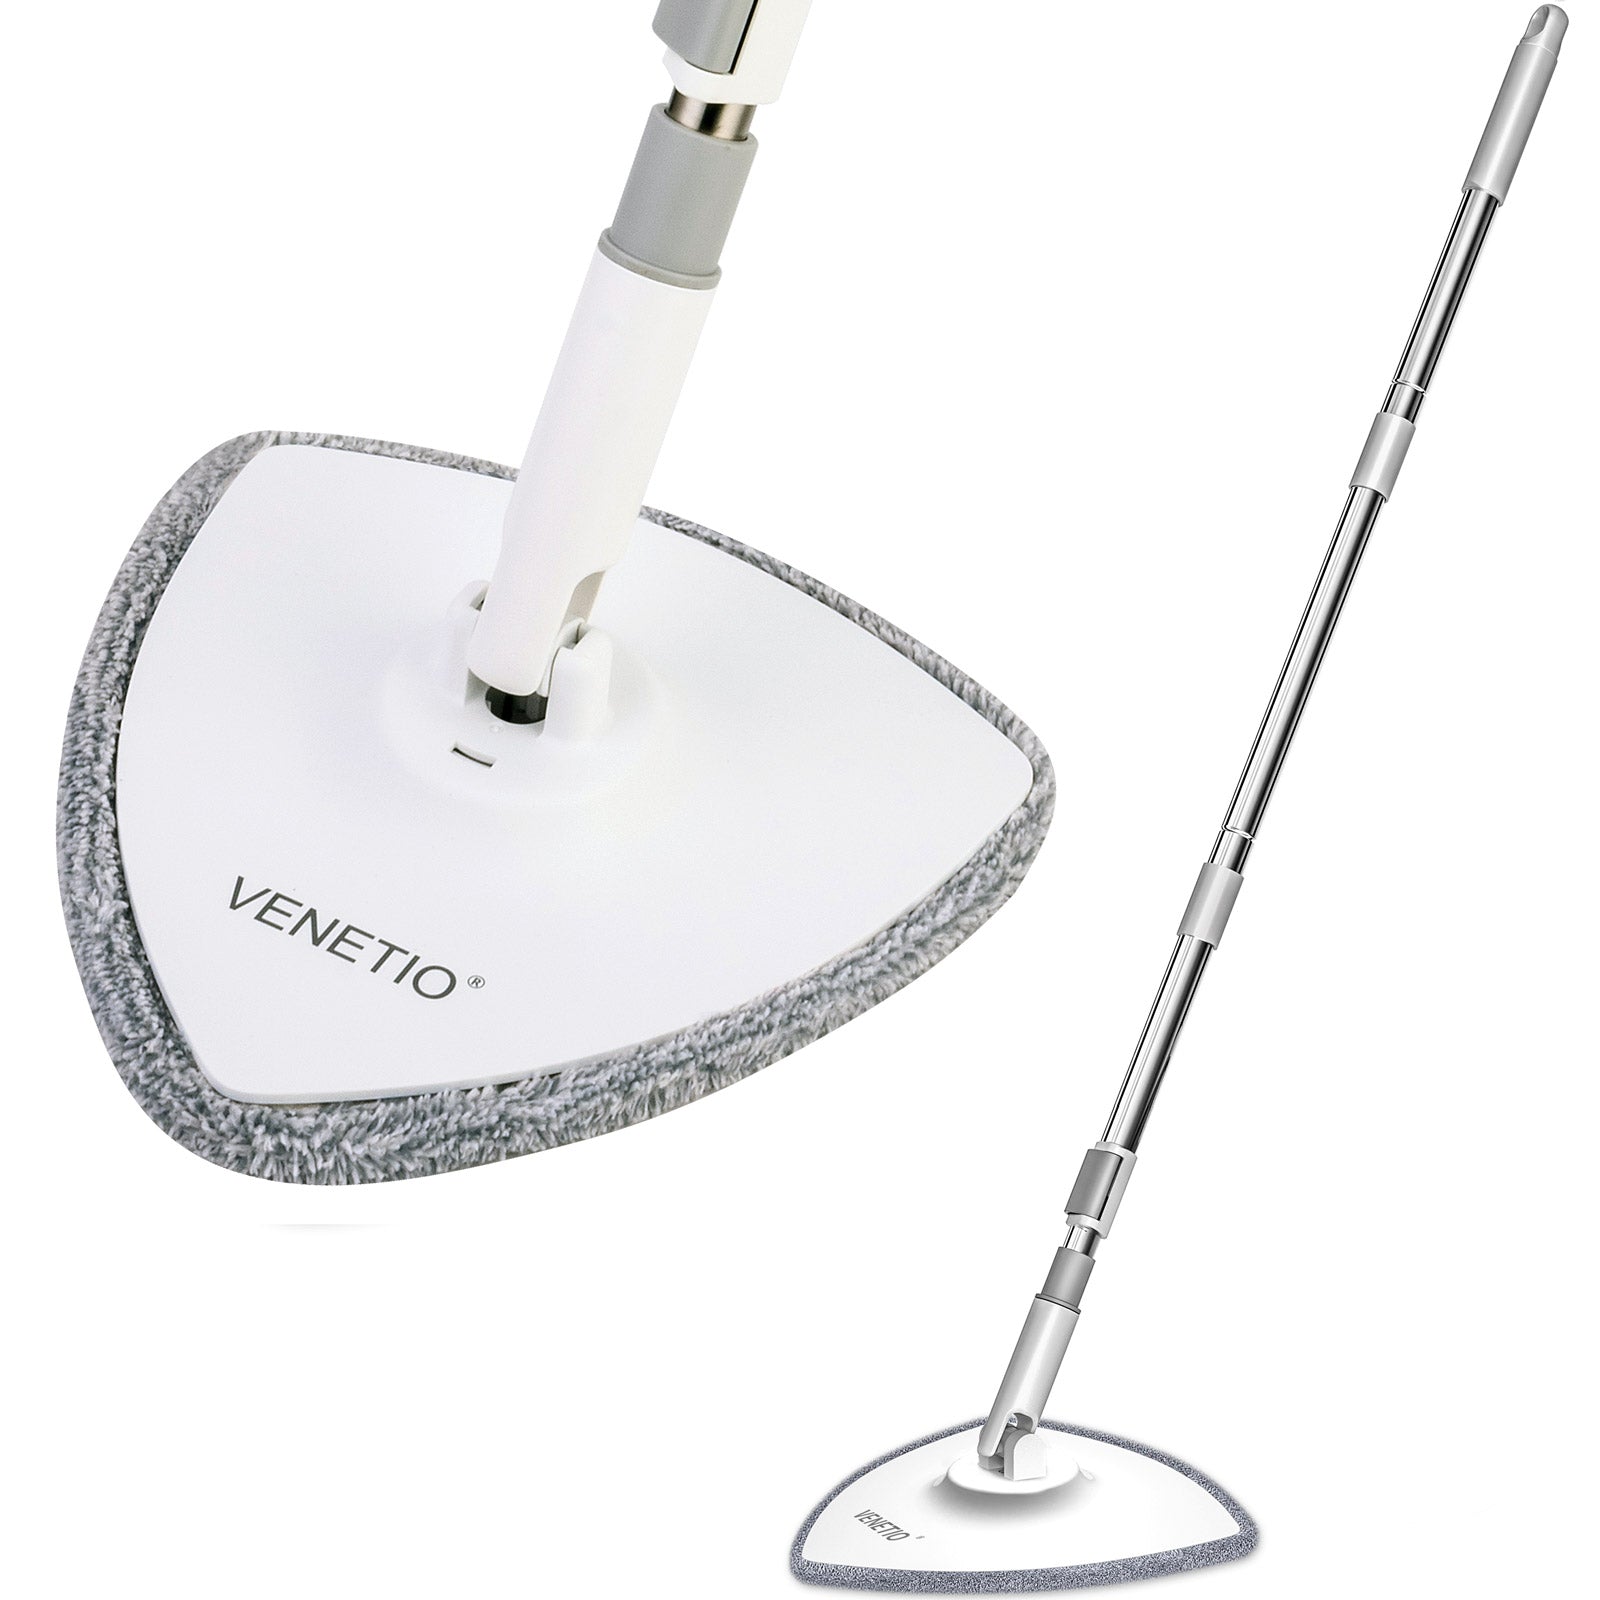 VENETIO Triangle iMOP Spin Mop Refills - Include 10" Washable Microfiber Mop Pad Replacements and Water Filter Replacements